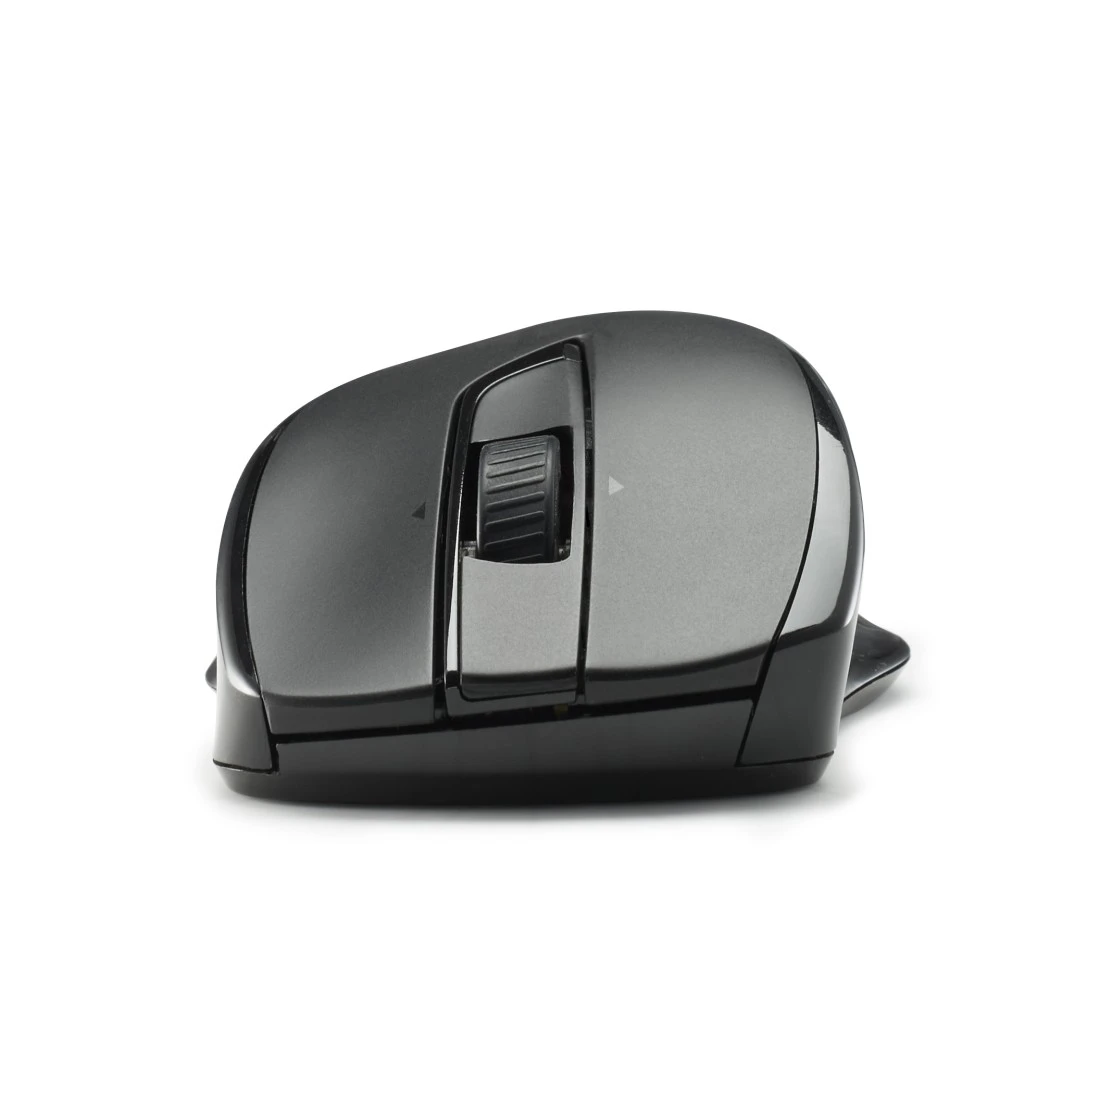 You Recently Viewed Hama 00173015 MW-900 7-Button Laser Wireless Mouse, black Image